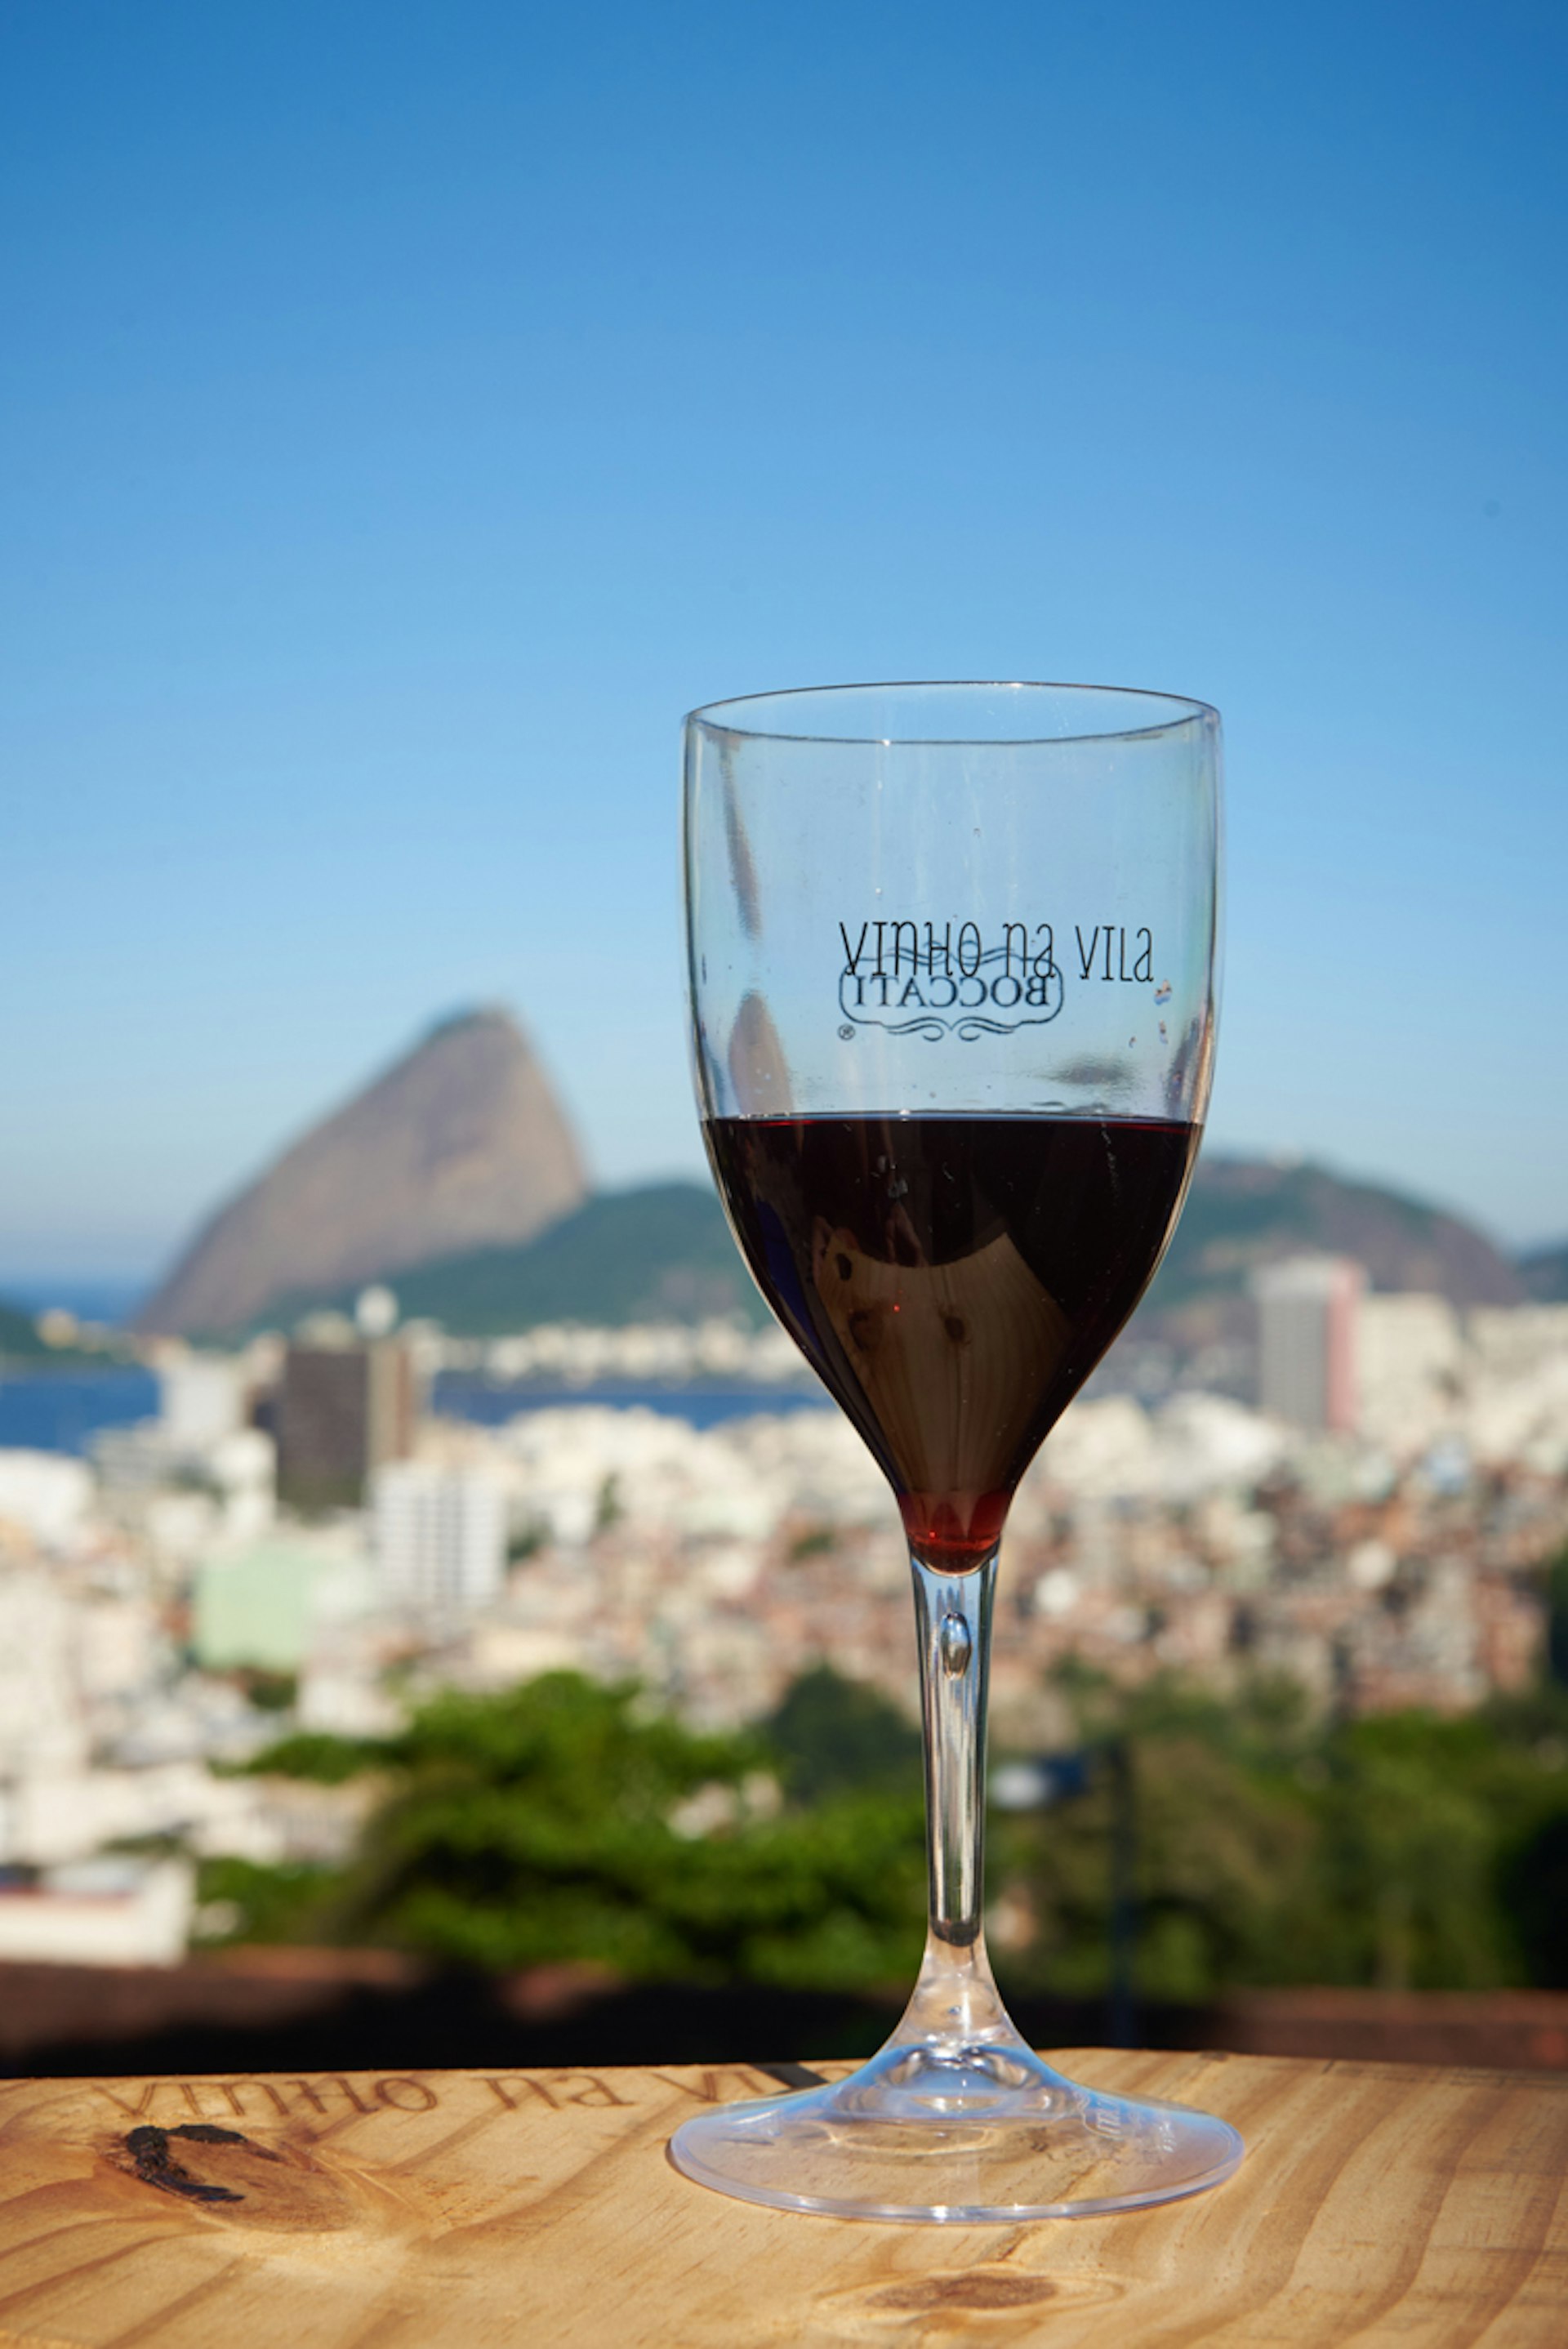 A wine glass filled with red wine sits on a wine barrel overlooking Rio de Janiero, Brazil